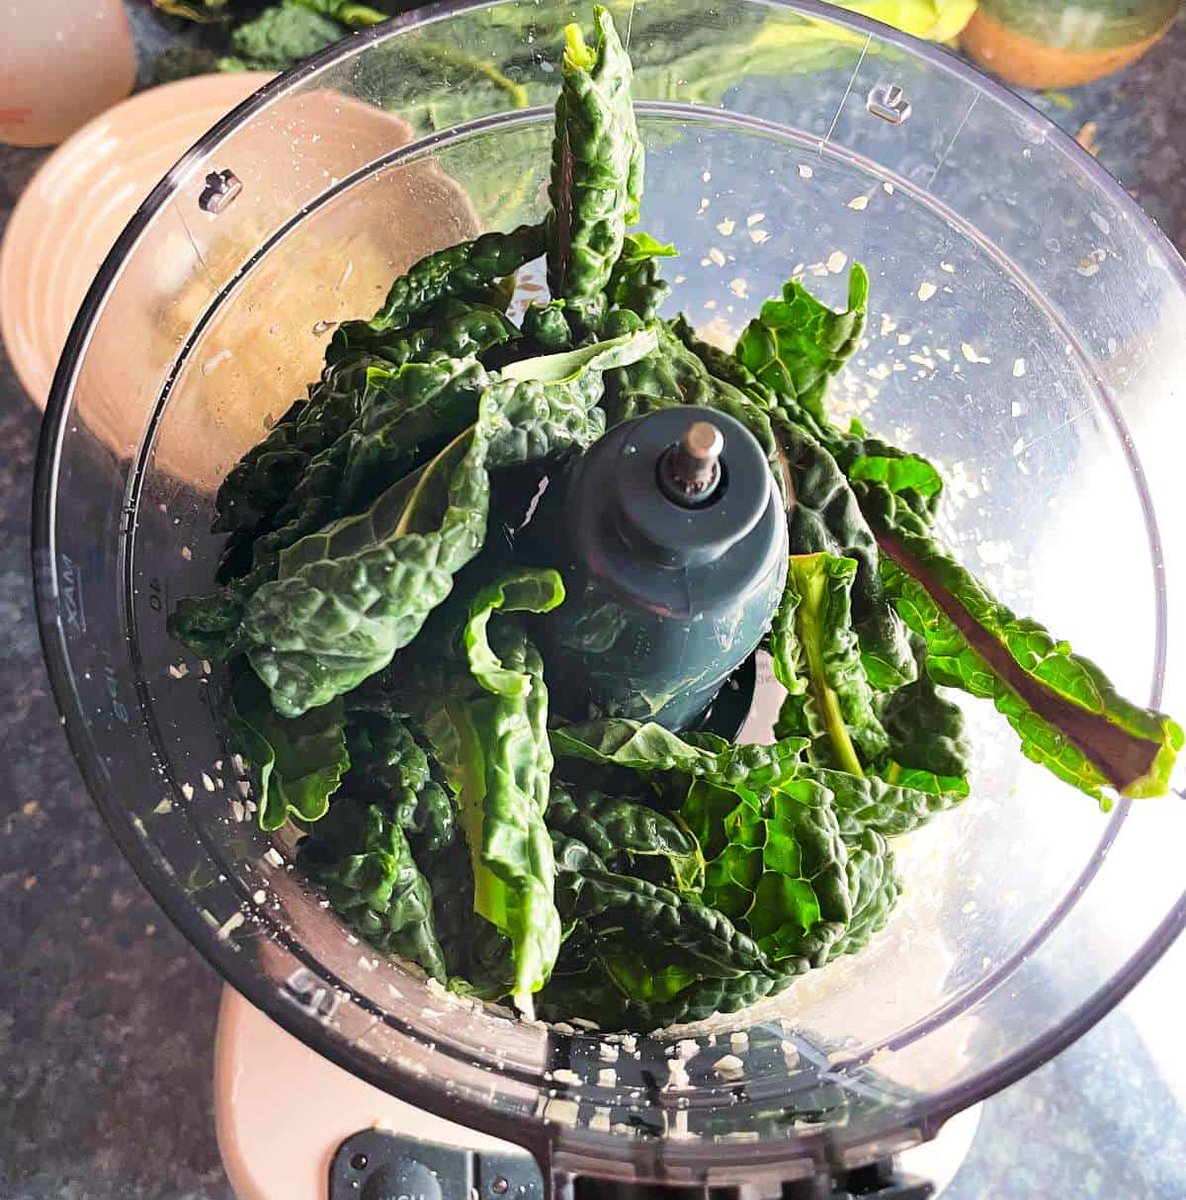 Another batch of our Easy Kale Pesto Recipe in the works here! buff.ly/3gXySmq #pesto #favoriterecipes